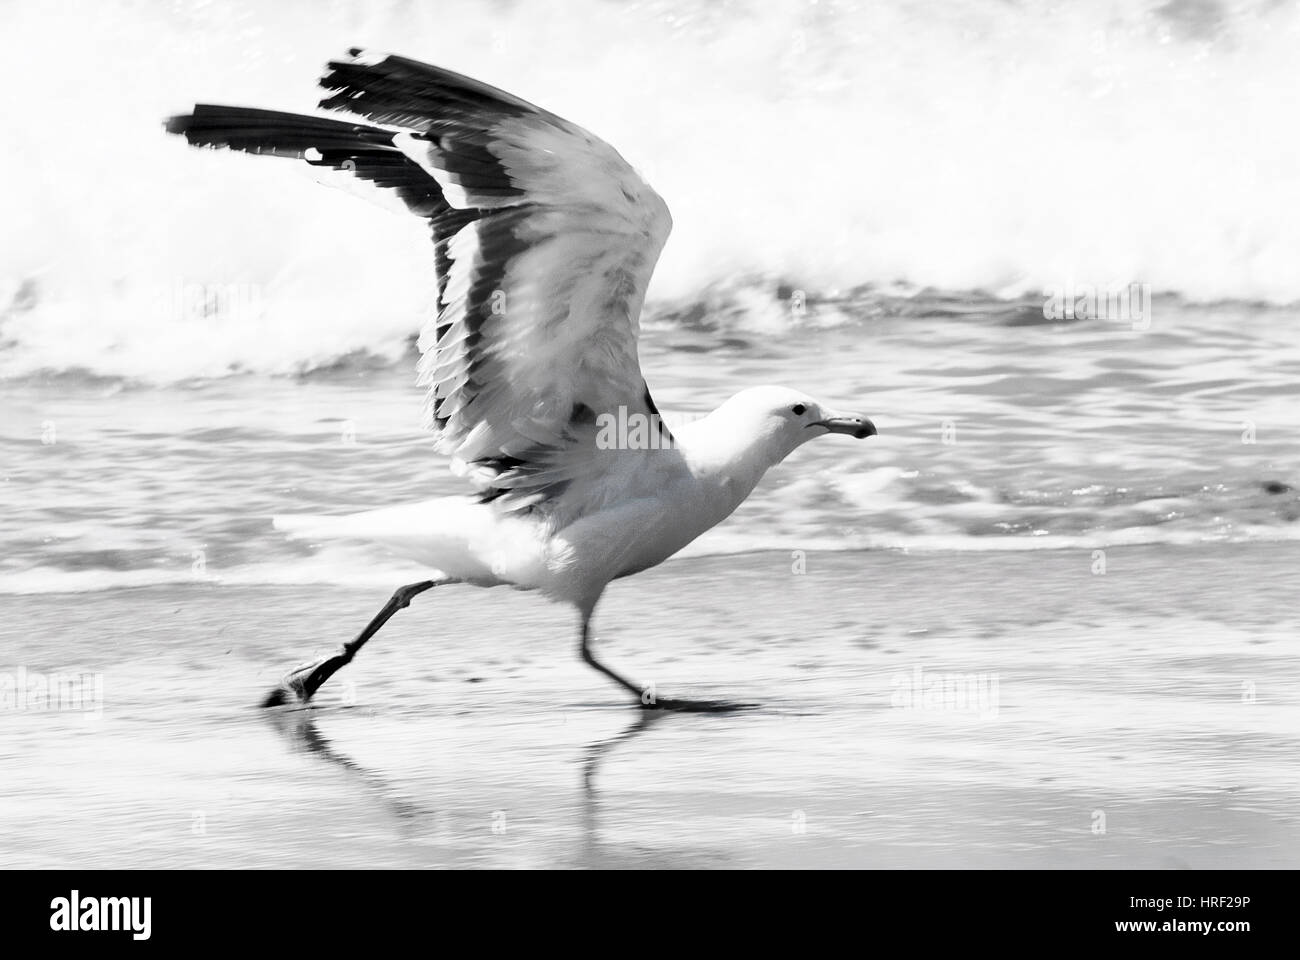 A seagull running on a beach to takeoff Stock Photo